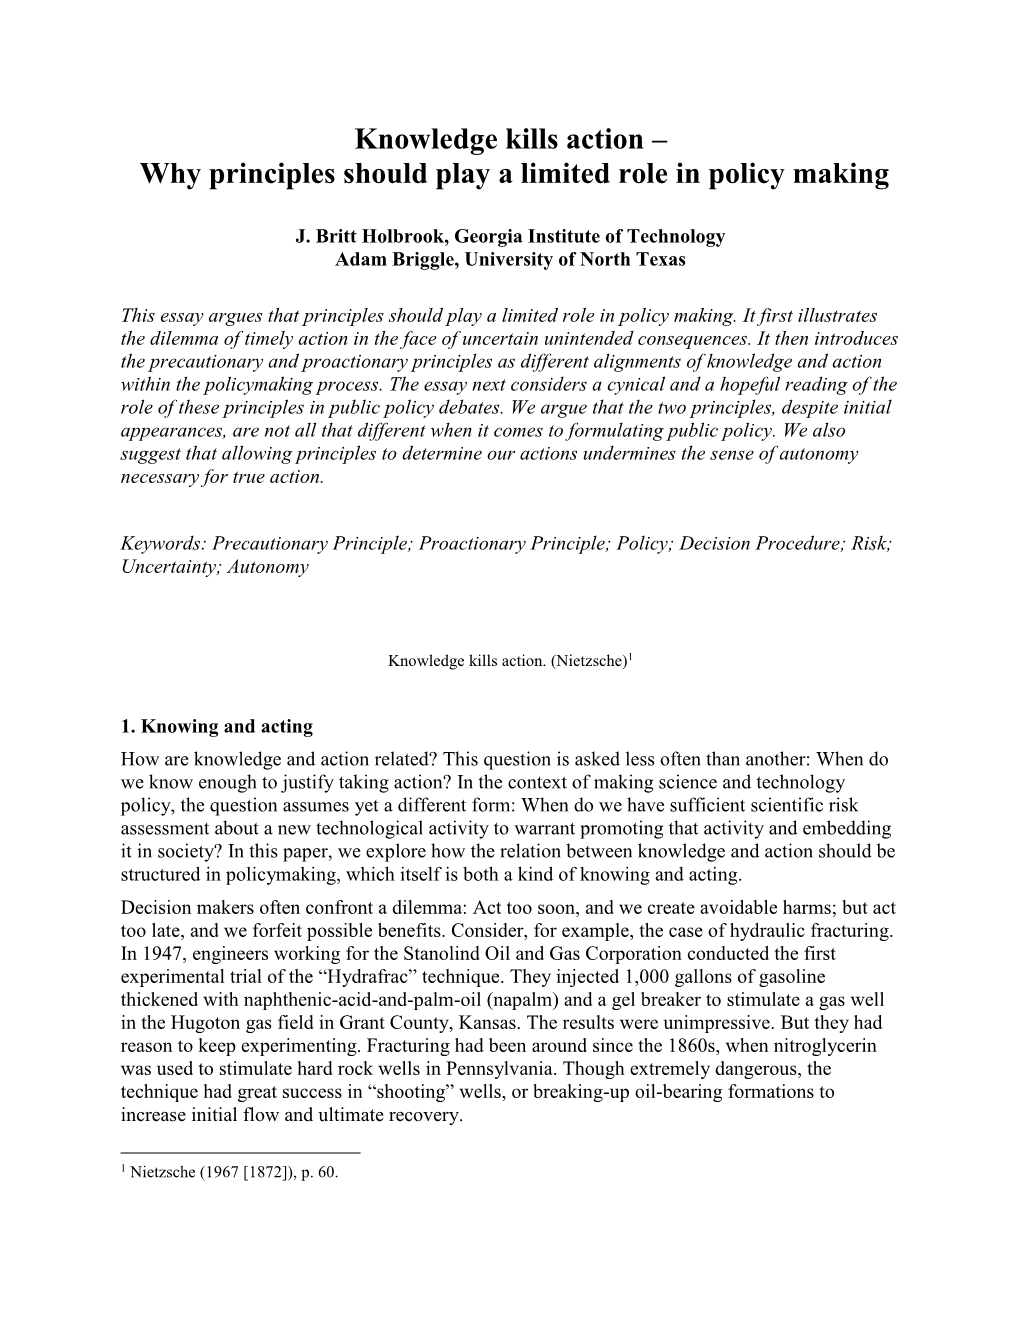 Why Principles Should Play a Limited Role in Policy Making